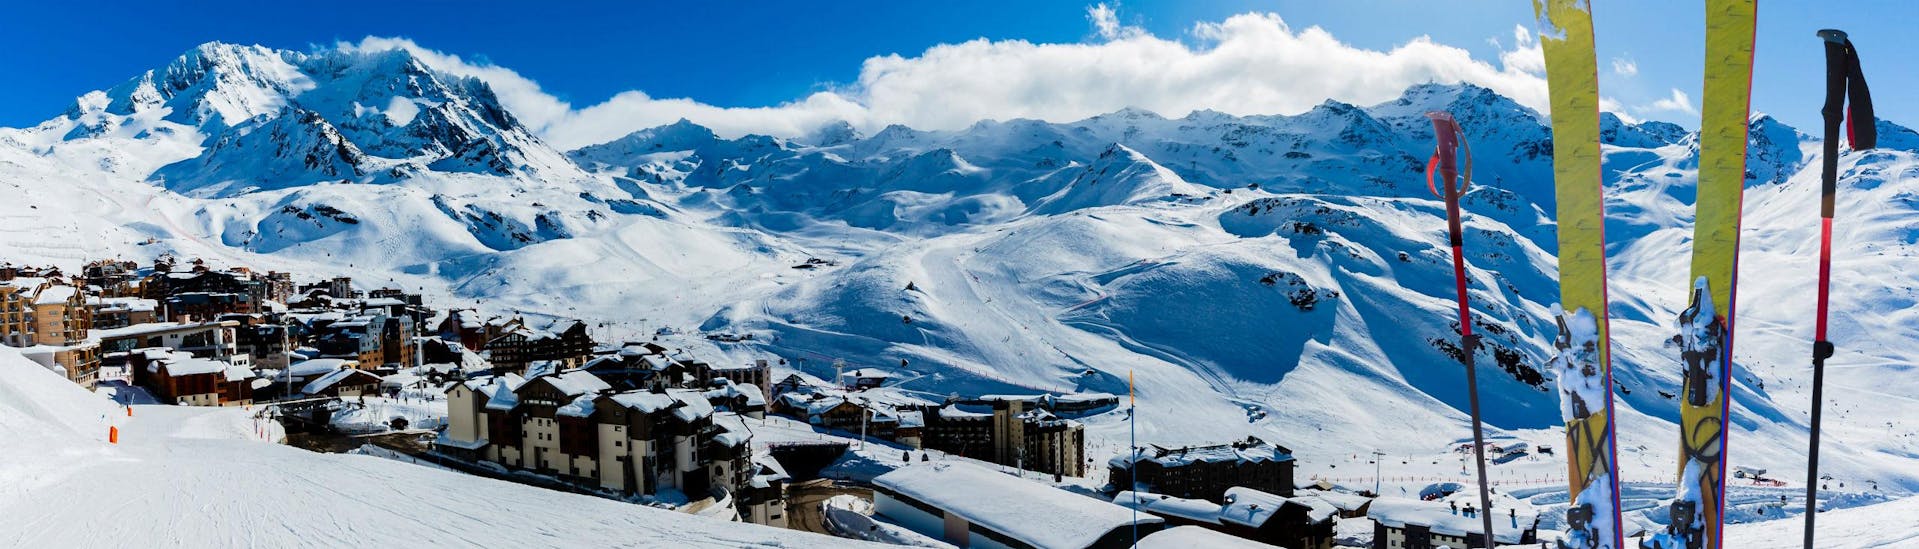 A view of a snowy mountain top in the ski resort of Les 3 Vallées, where ski schools gather to start their ski lessons.